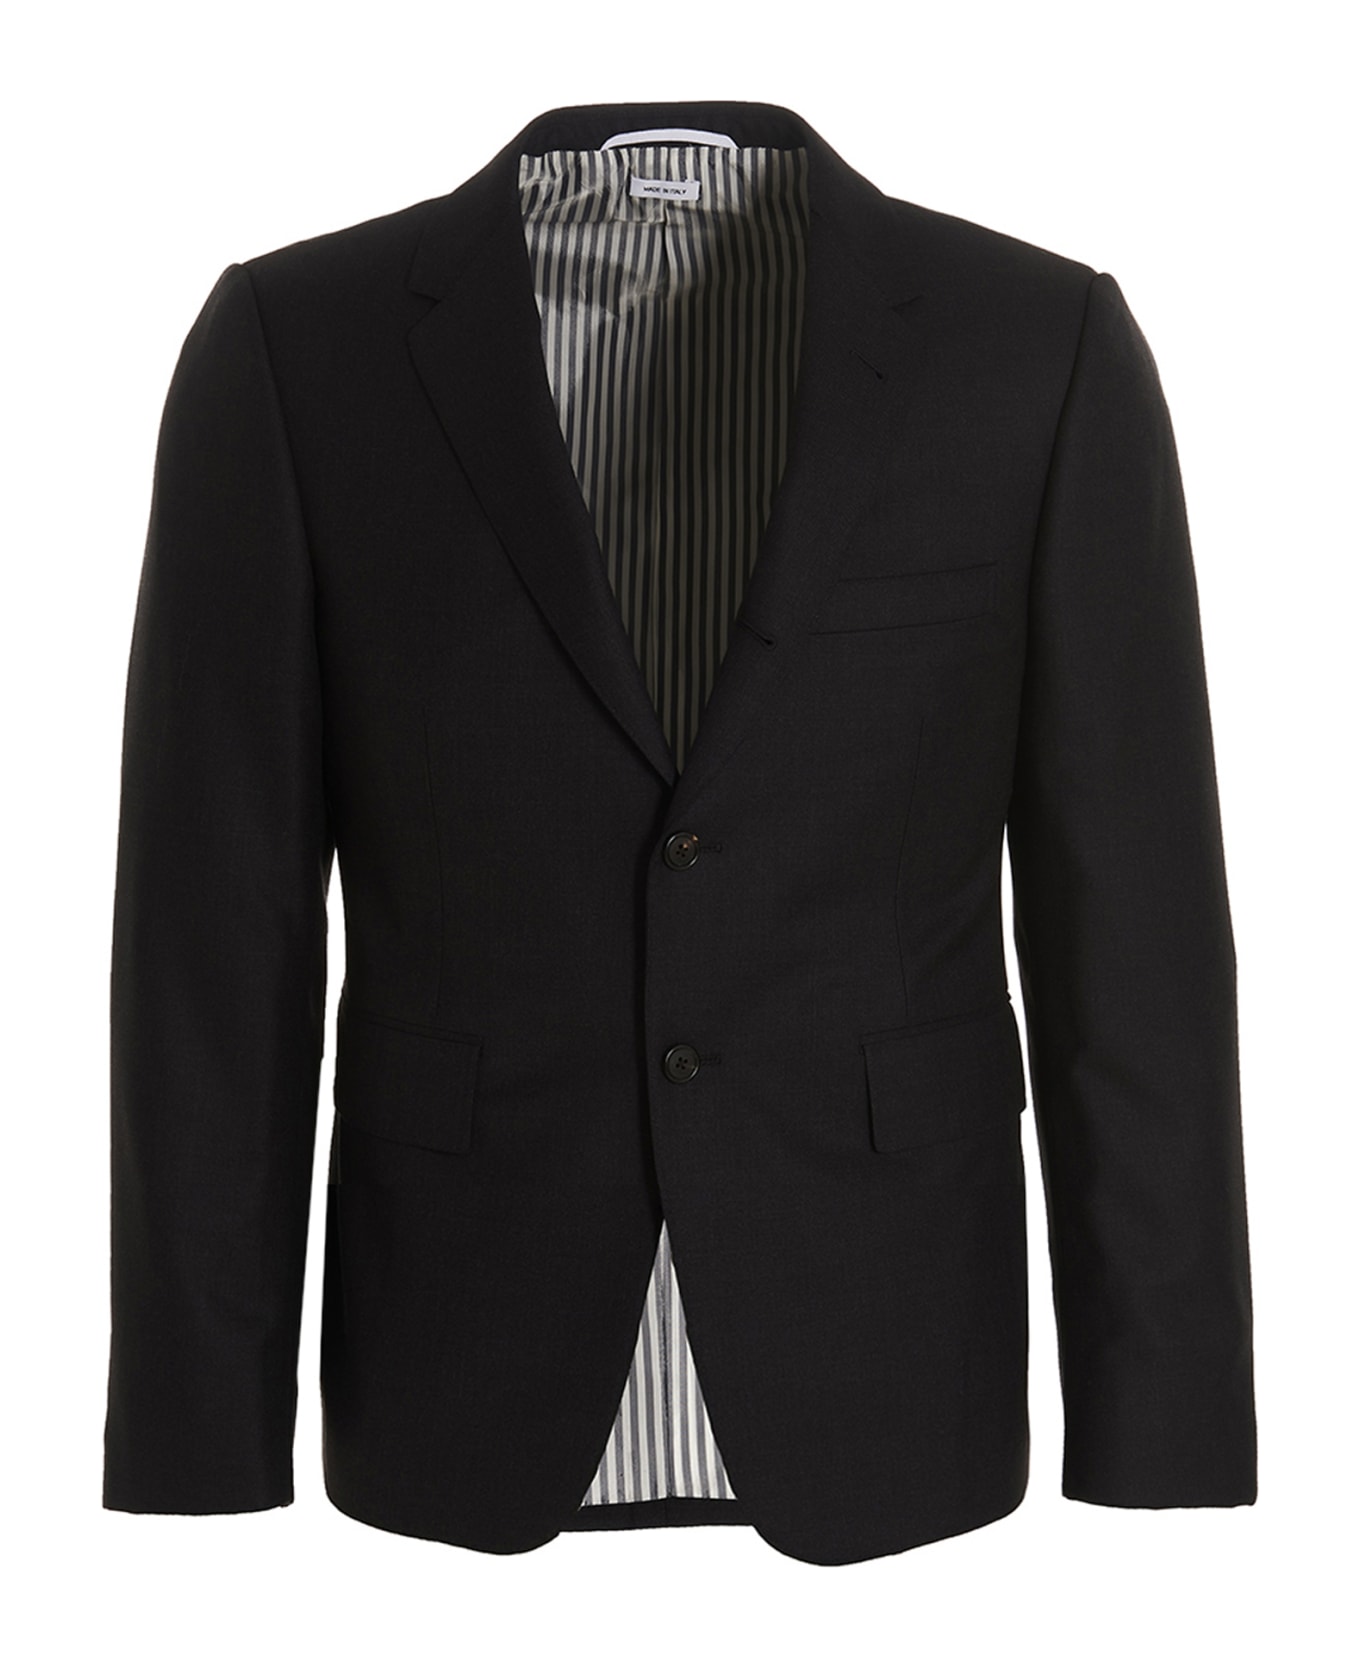 Thom Browne Classic Suit - Gray